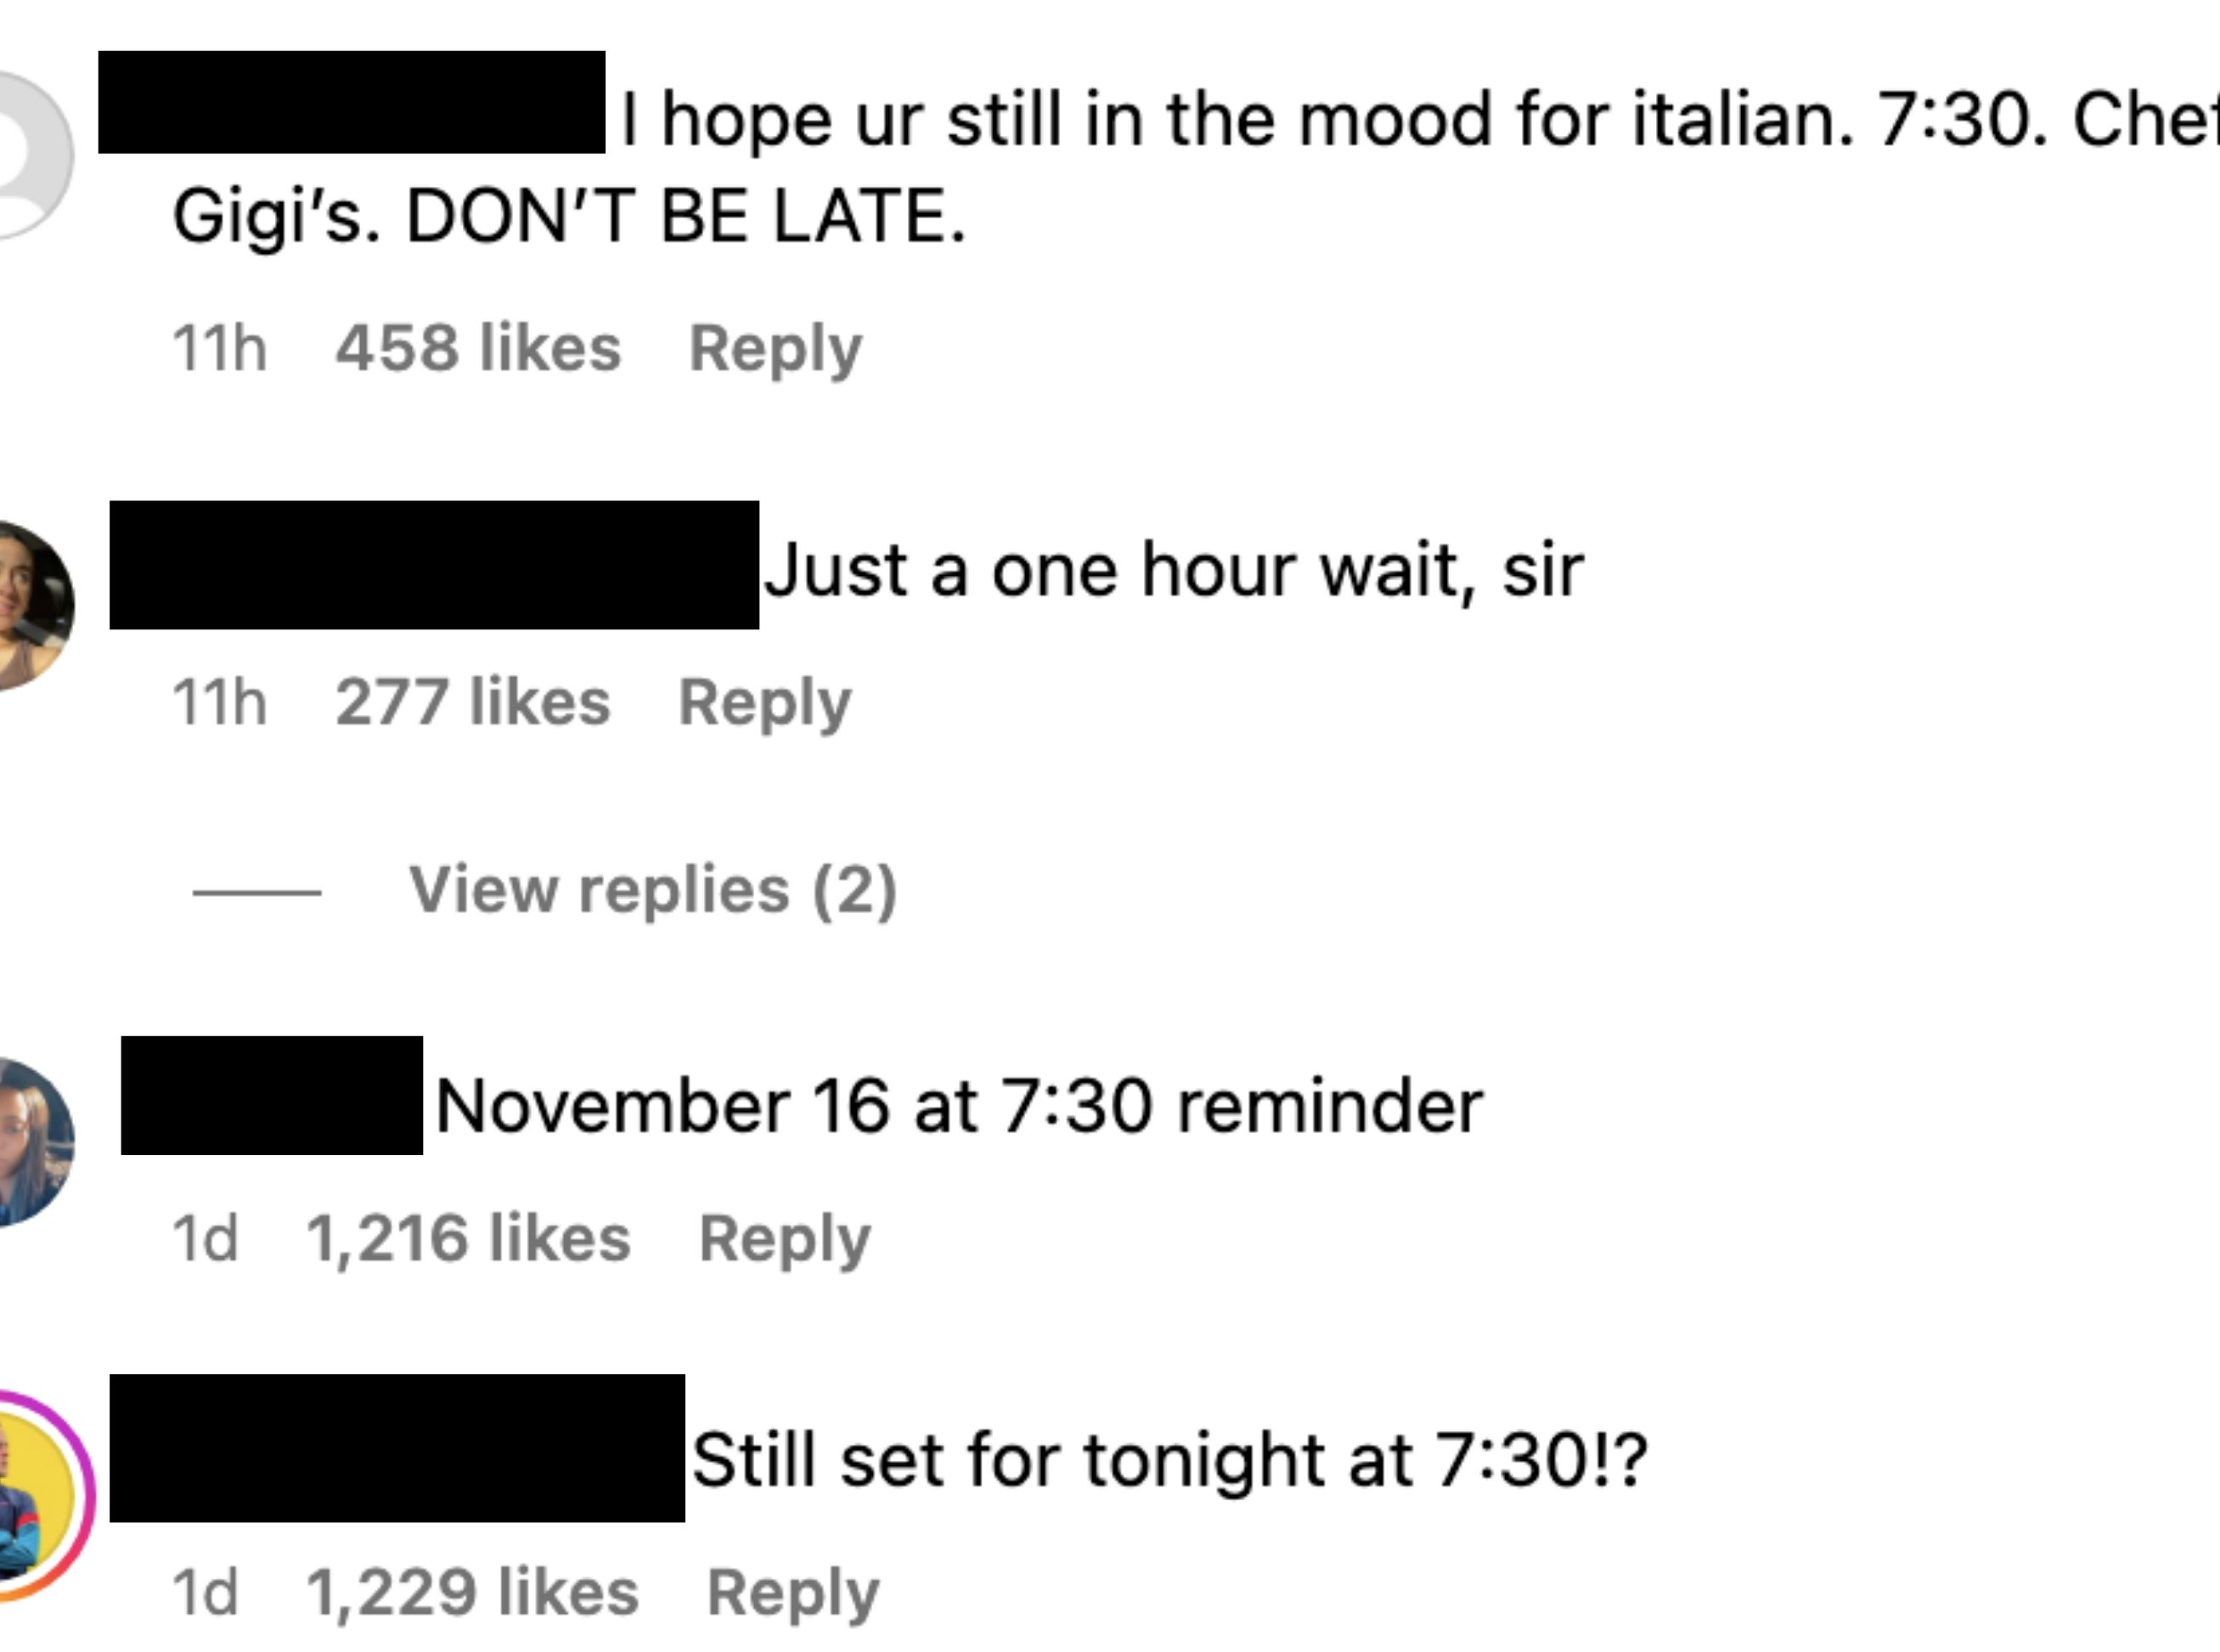 Other comments: &quot;Just a one hour wait, sir,&quot; &quot;November 16 at 7:30 reminder,&quot; and &quot;Still set for tonight at 7:30!?&quot;